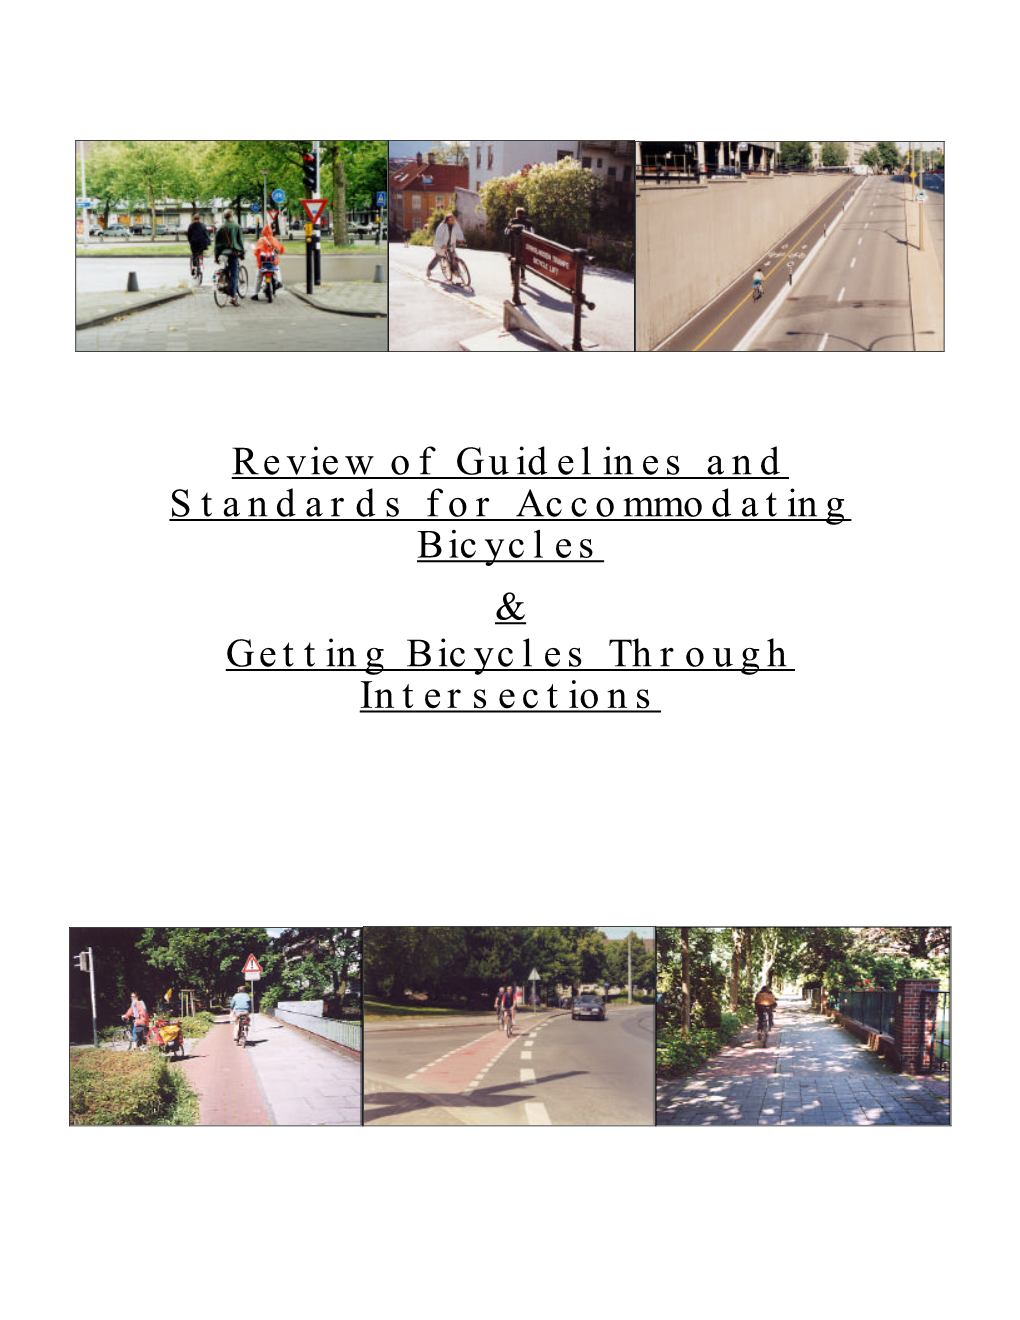 Review of Guidelines and Standards for Accommodating Bicycles & Getting Bicycles Through Intersections